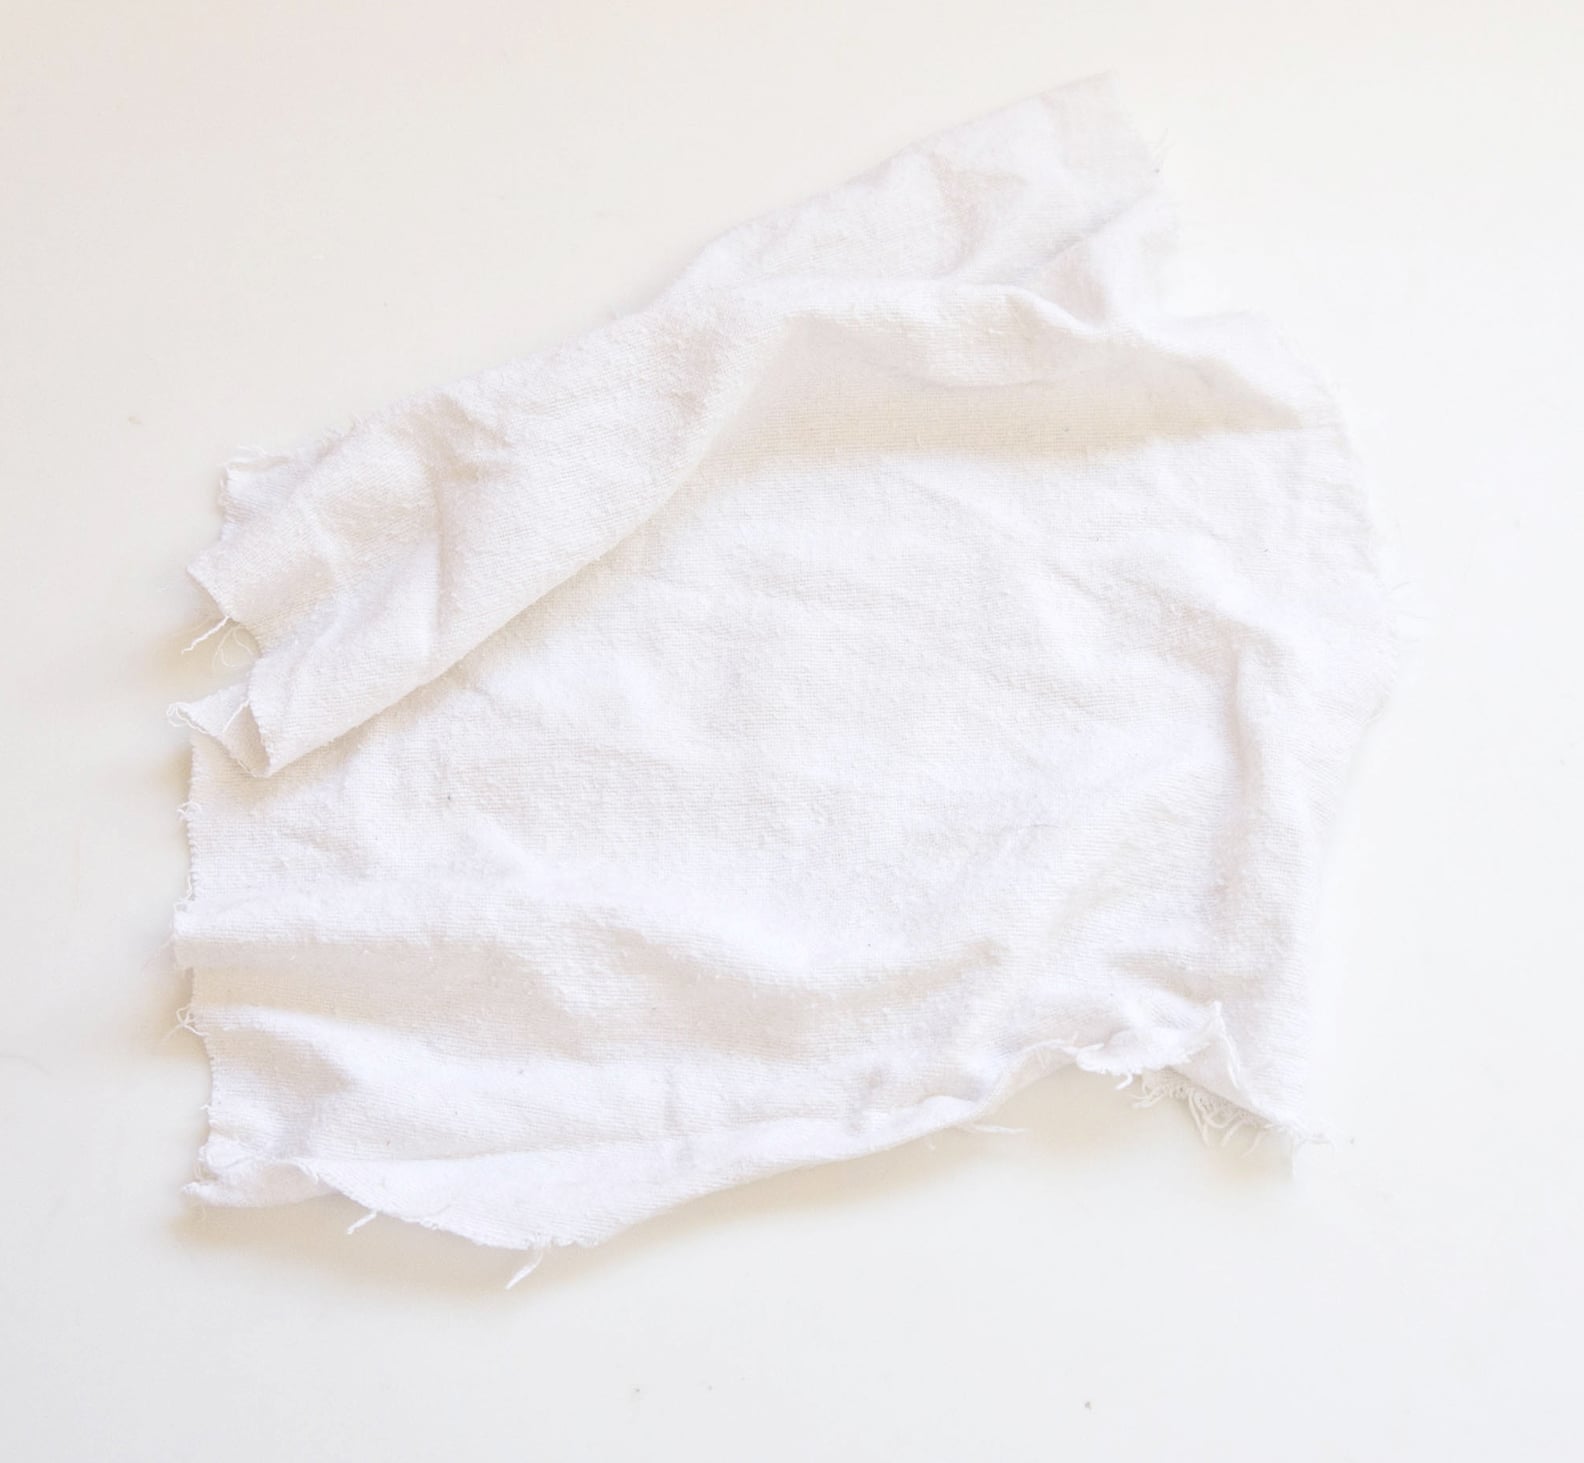 How to Get Out Blood Stains | POPSUGAR Smart Living